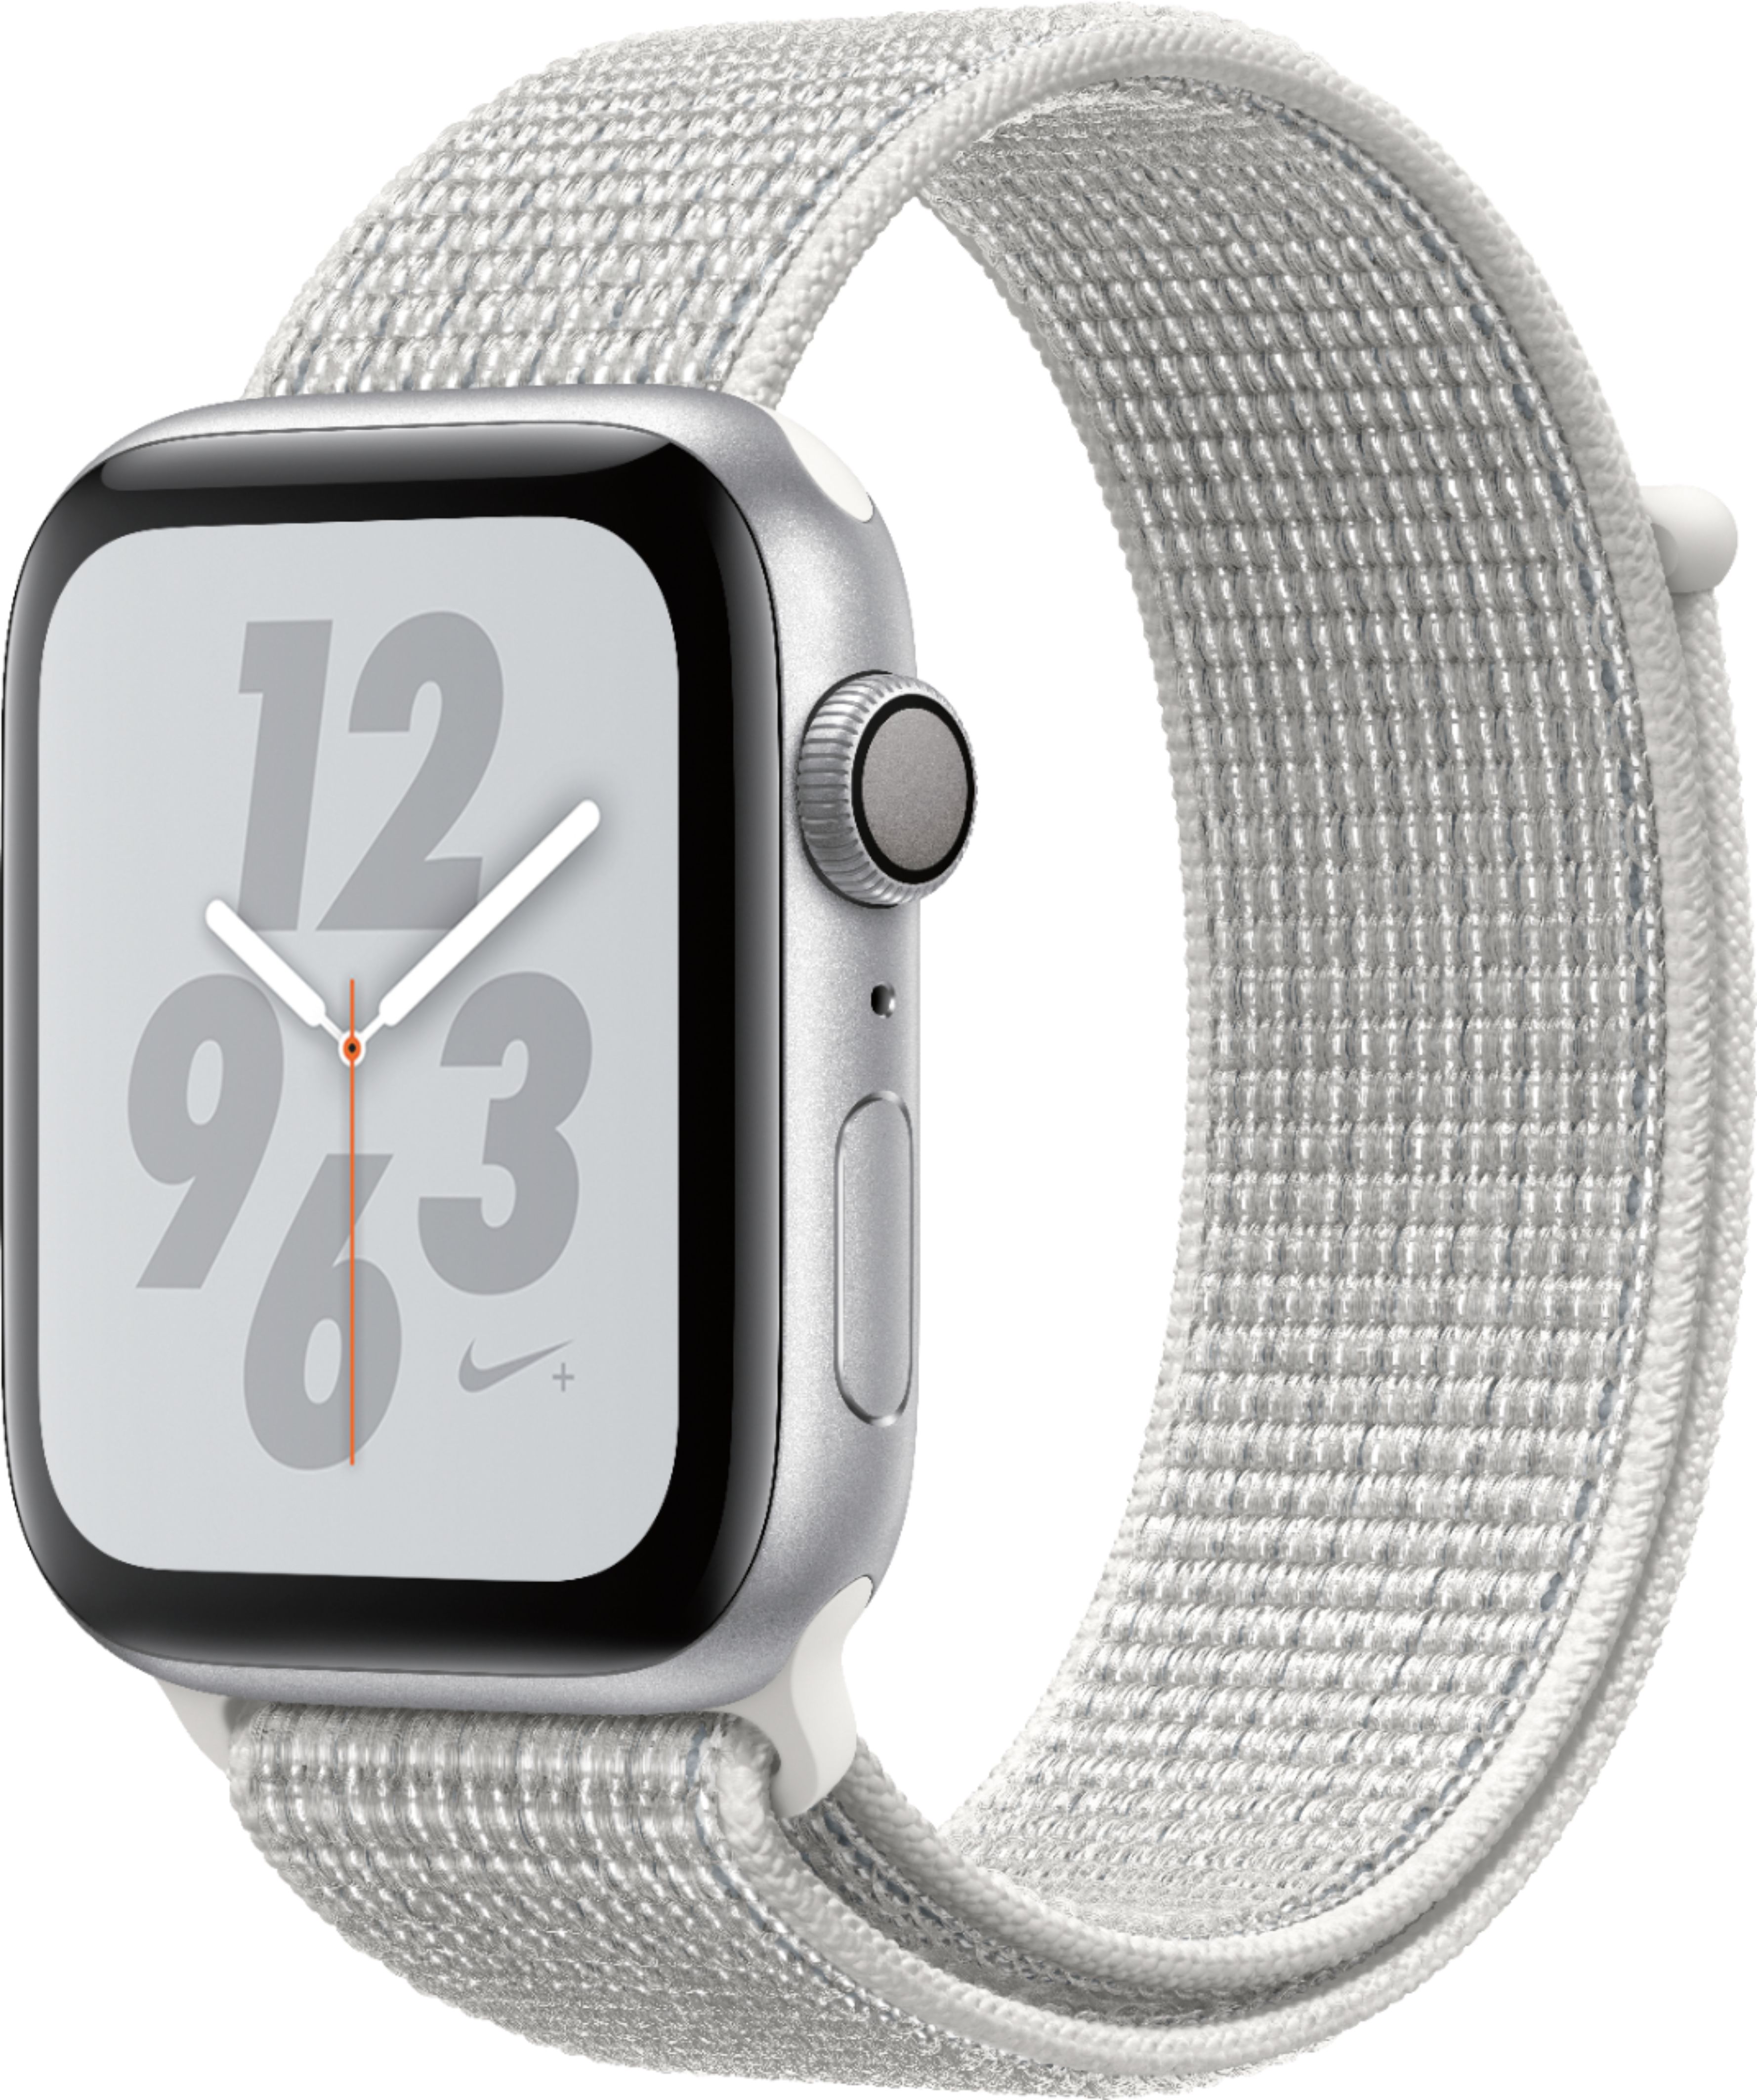 Apple Watch Nike+ Series 4 (GPS) 44mm Silver Aluminum Case with Summit White Nike Sport Loop - Silver Aluminum was $379.0 now $265.99 (30.0% off)